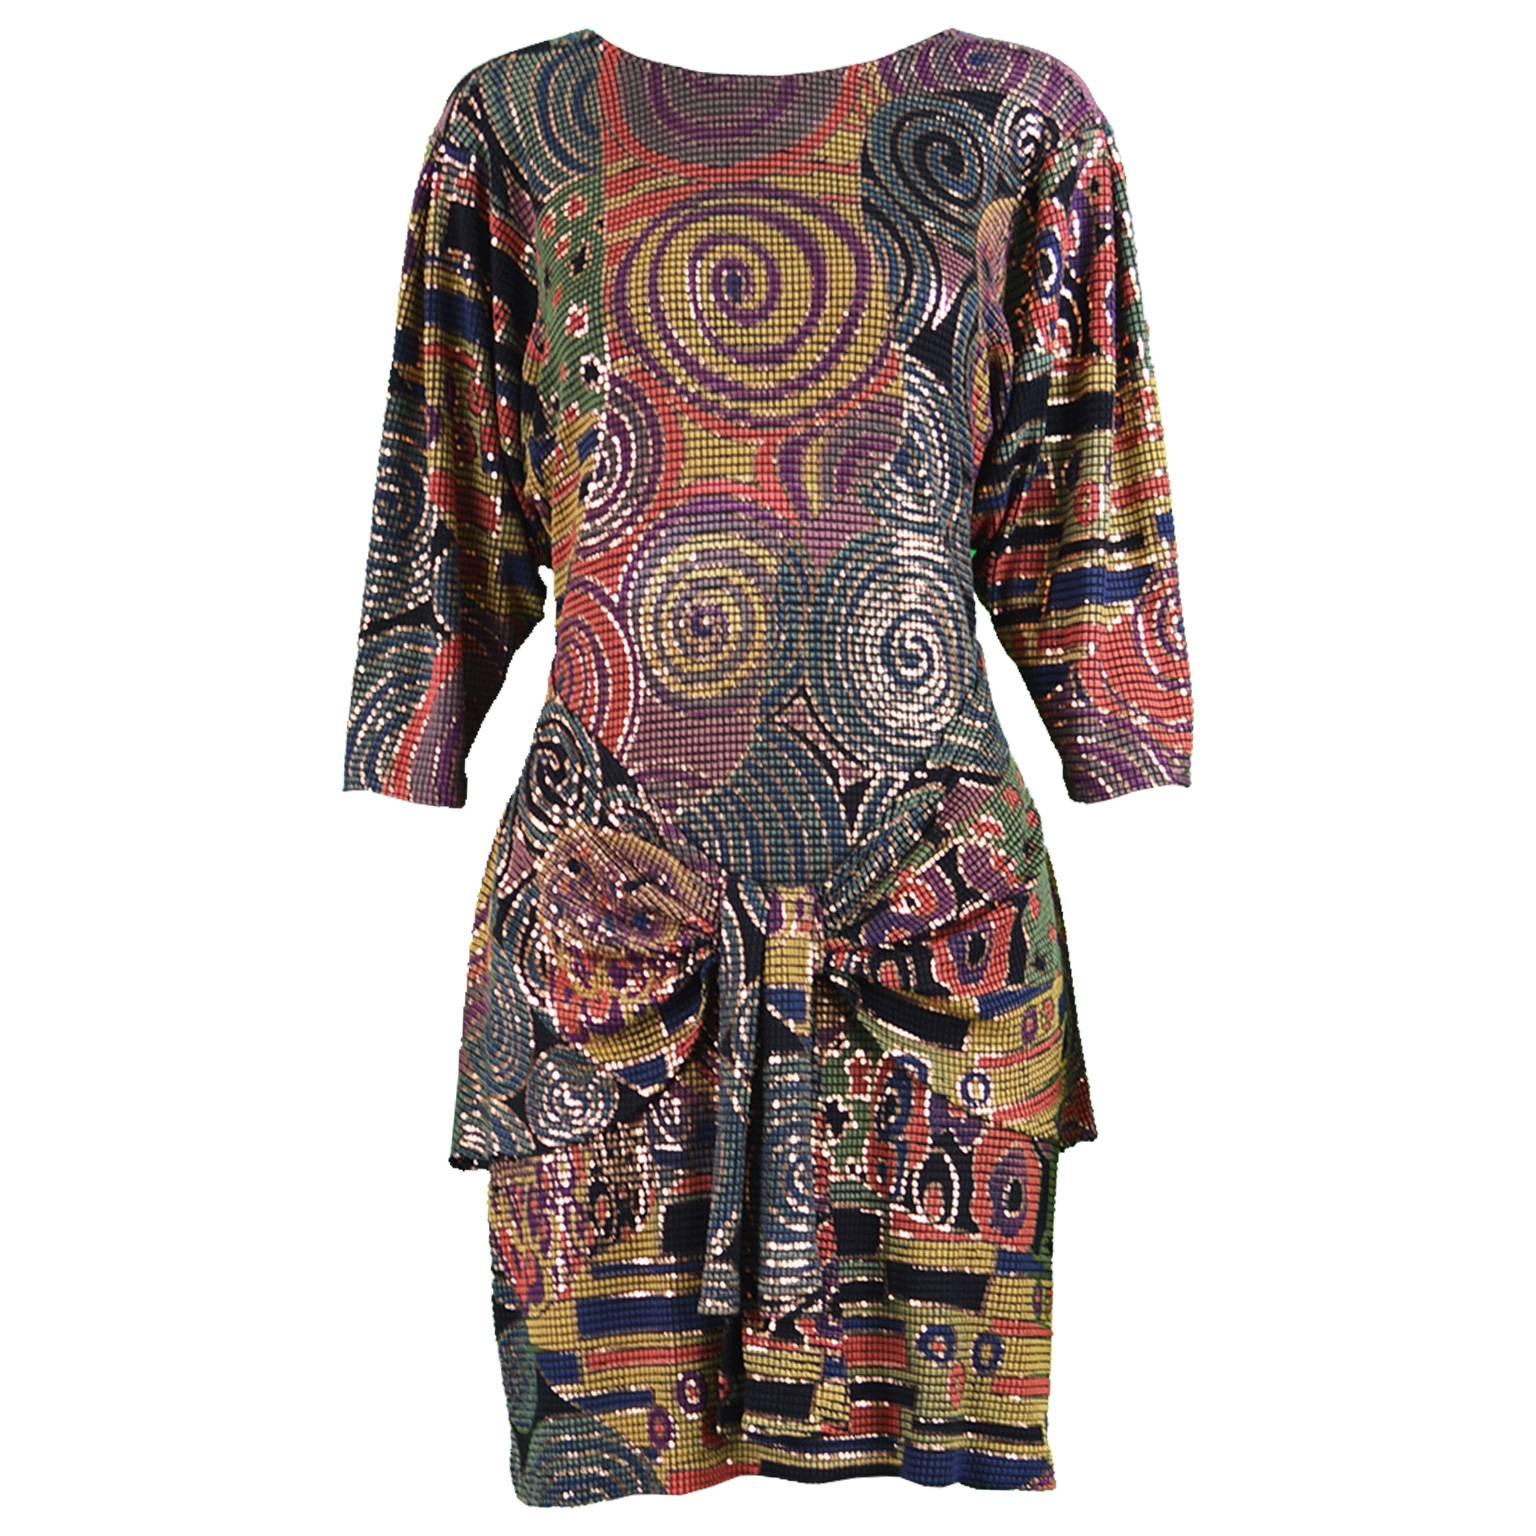 Caché Metallic Painted Mosaic Draped Vintage Evening Dress, 1980s For Sale